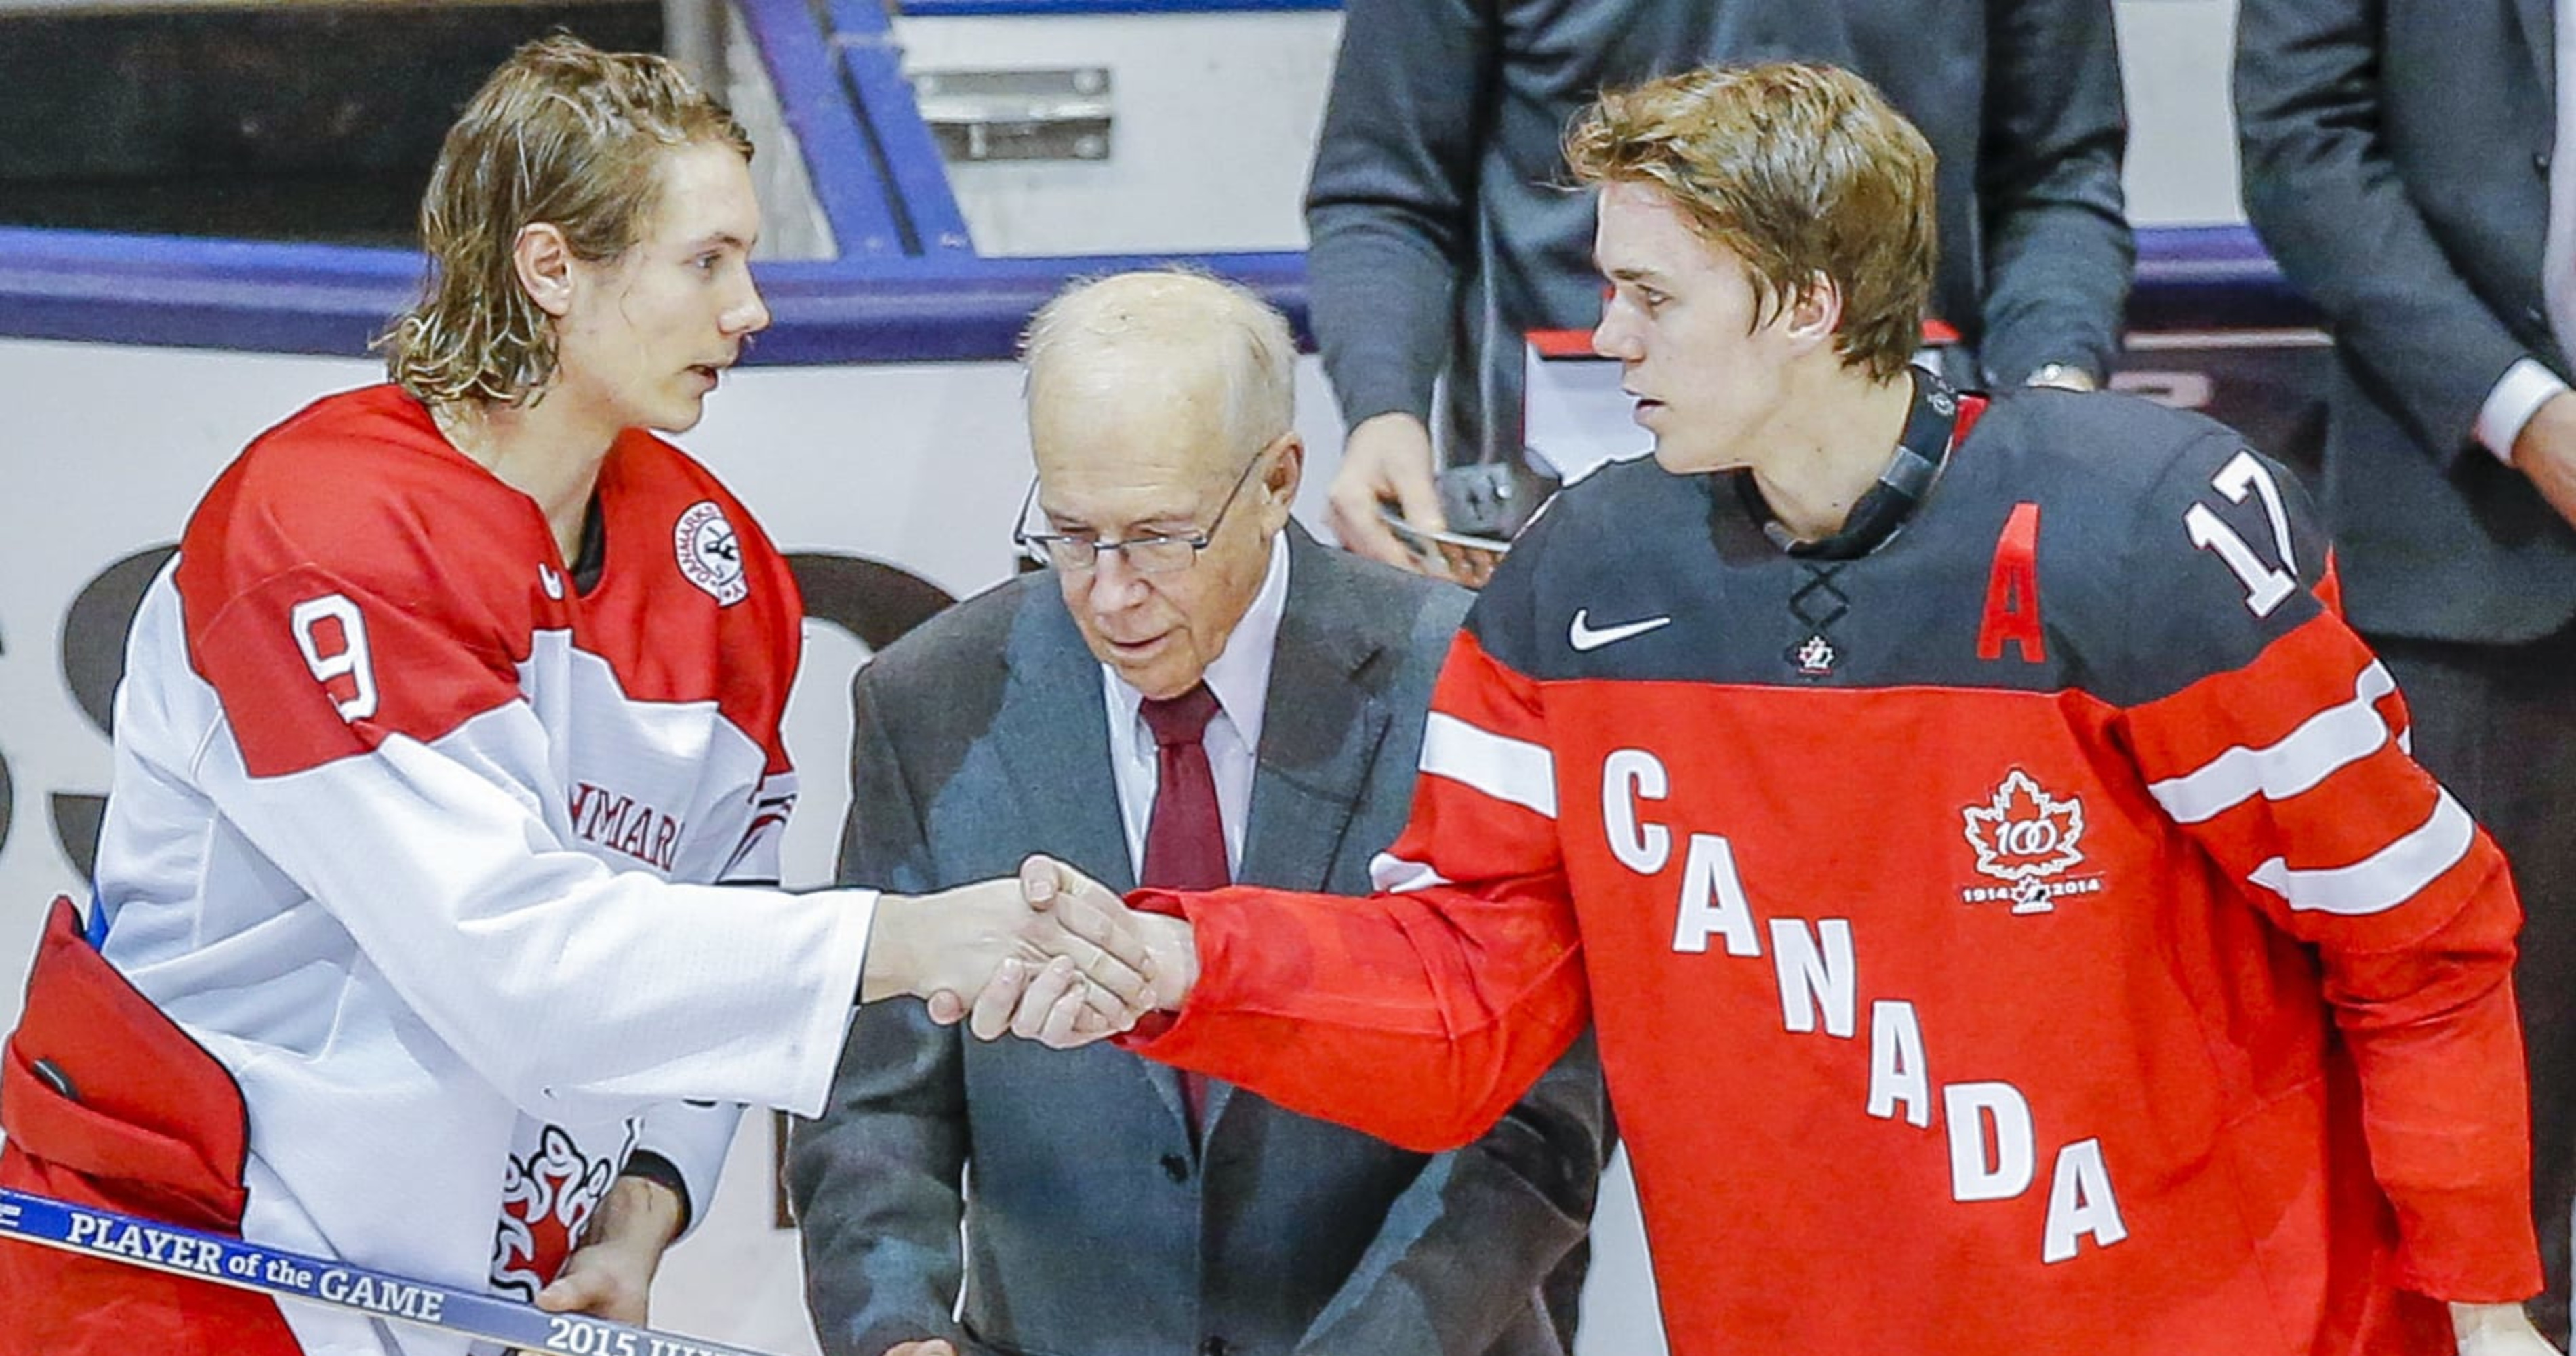 US shuts out Canada in title game to win world juniors